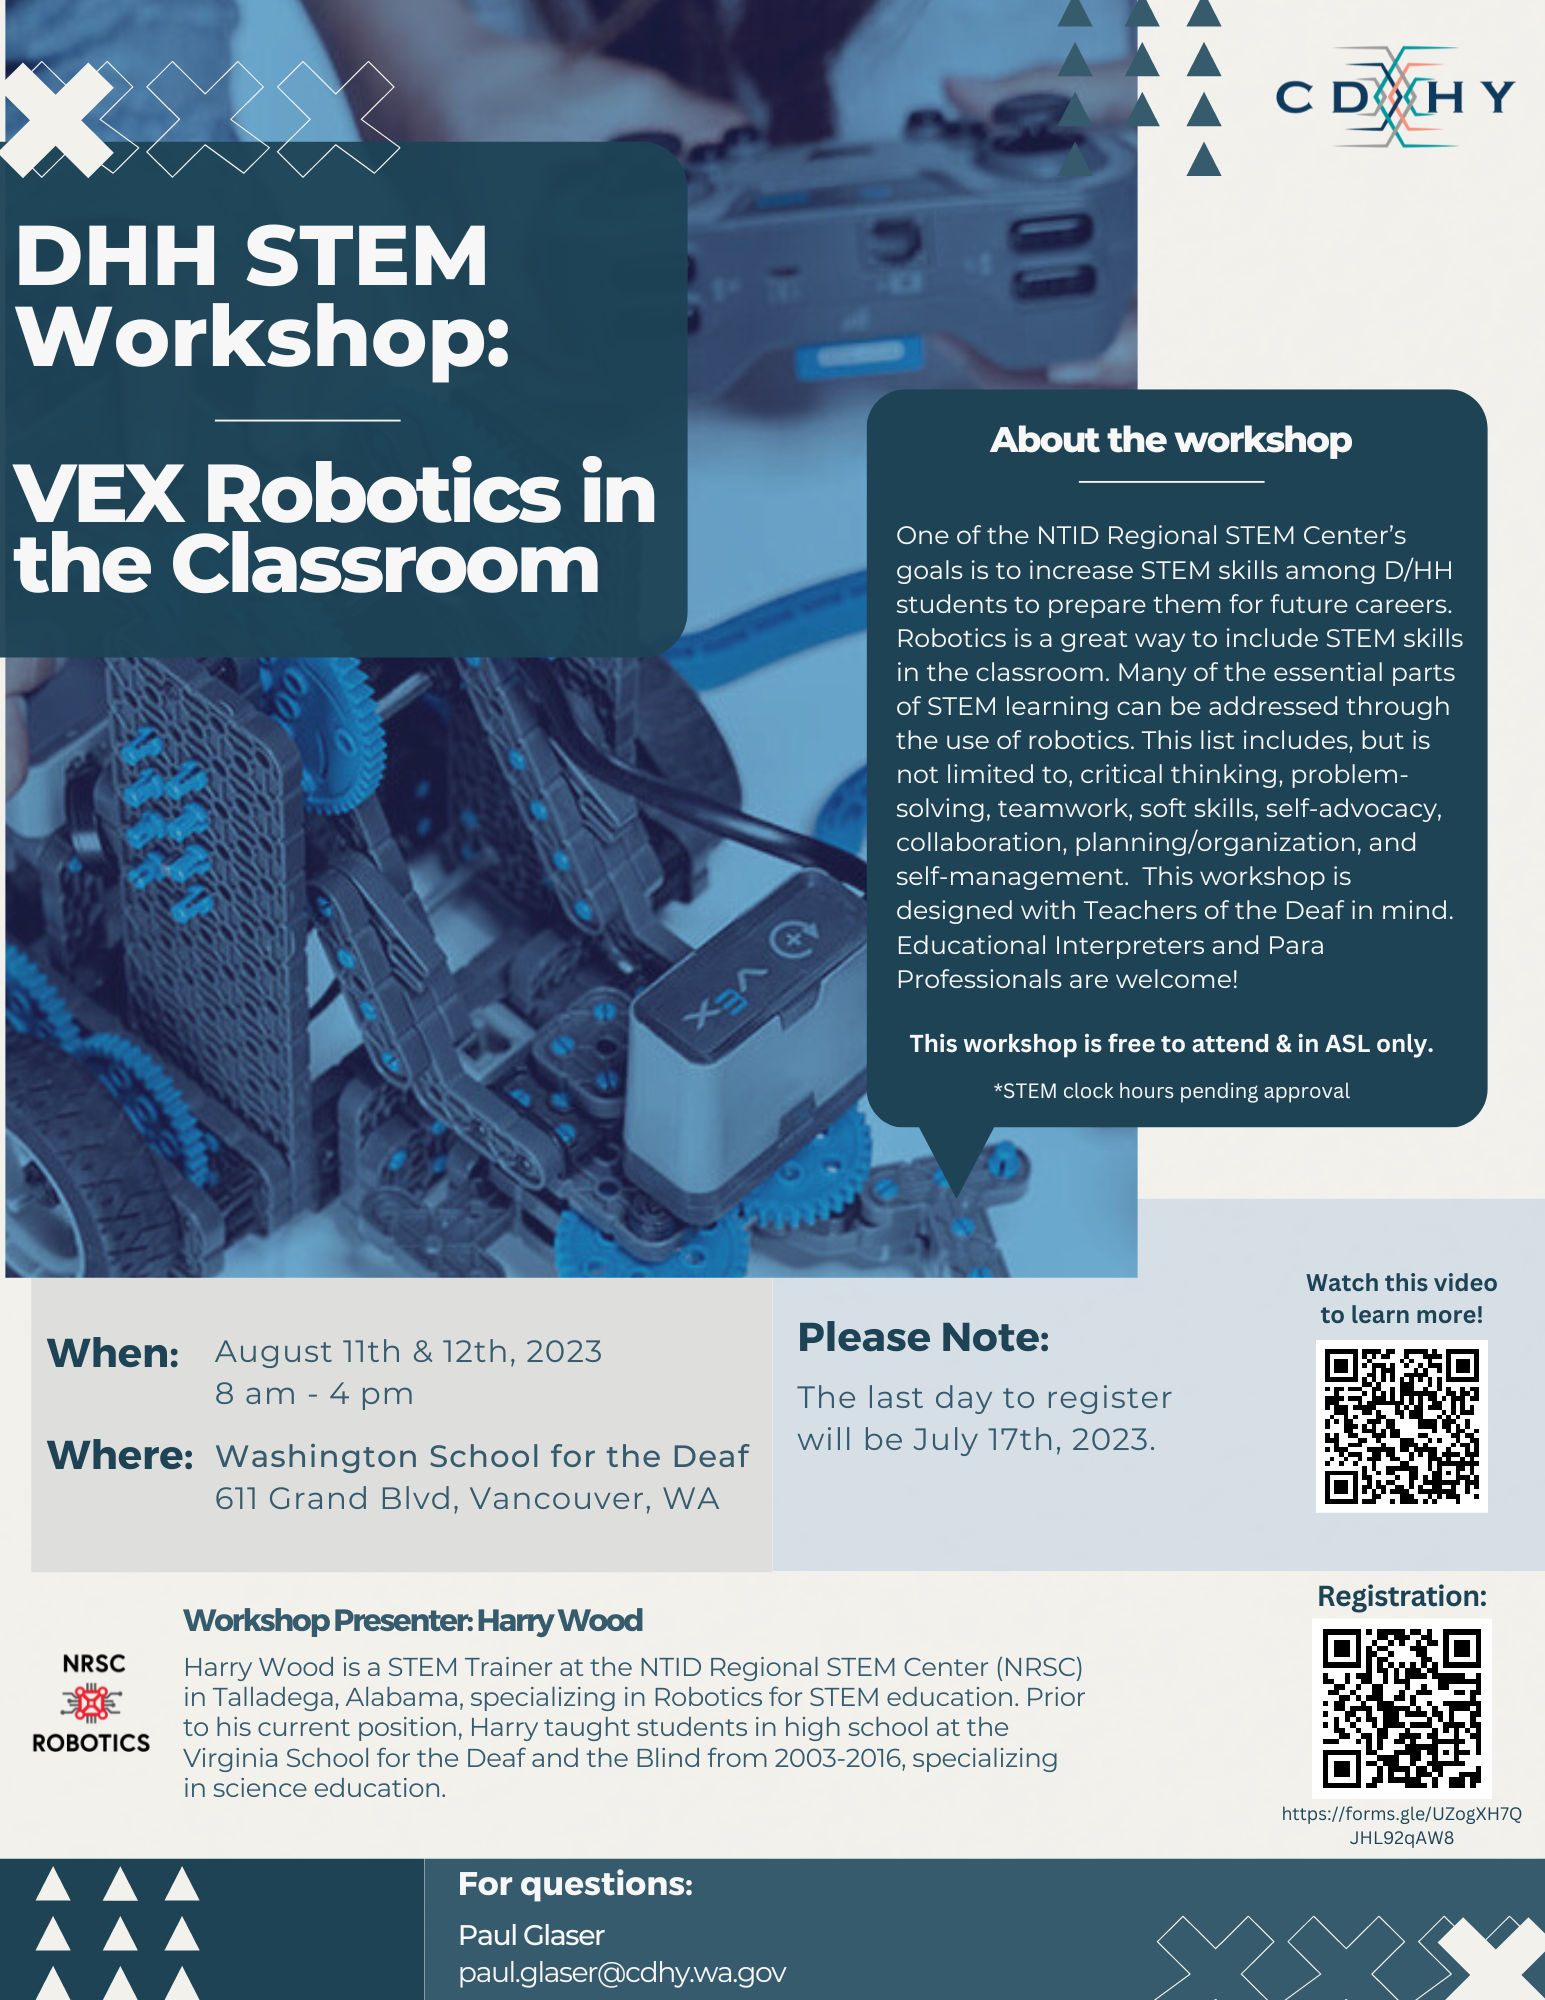 DHH STEM Workshop: VEX robotics in the classroom.
August 11th and 12th 2023, 8am to 4pm at WSD. Free to attend and held in ASL only. 